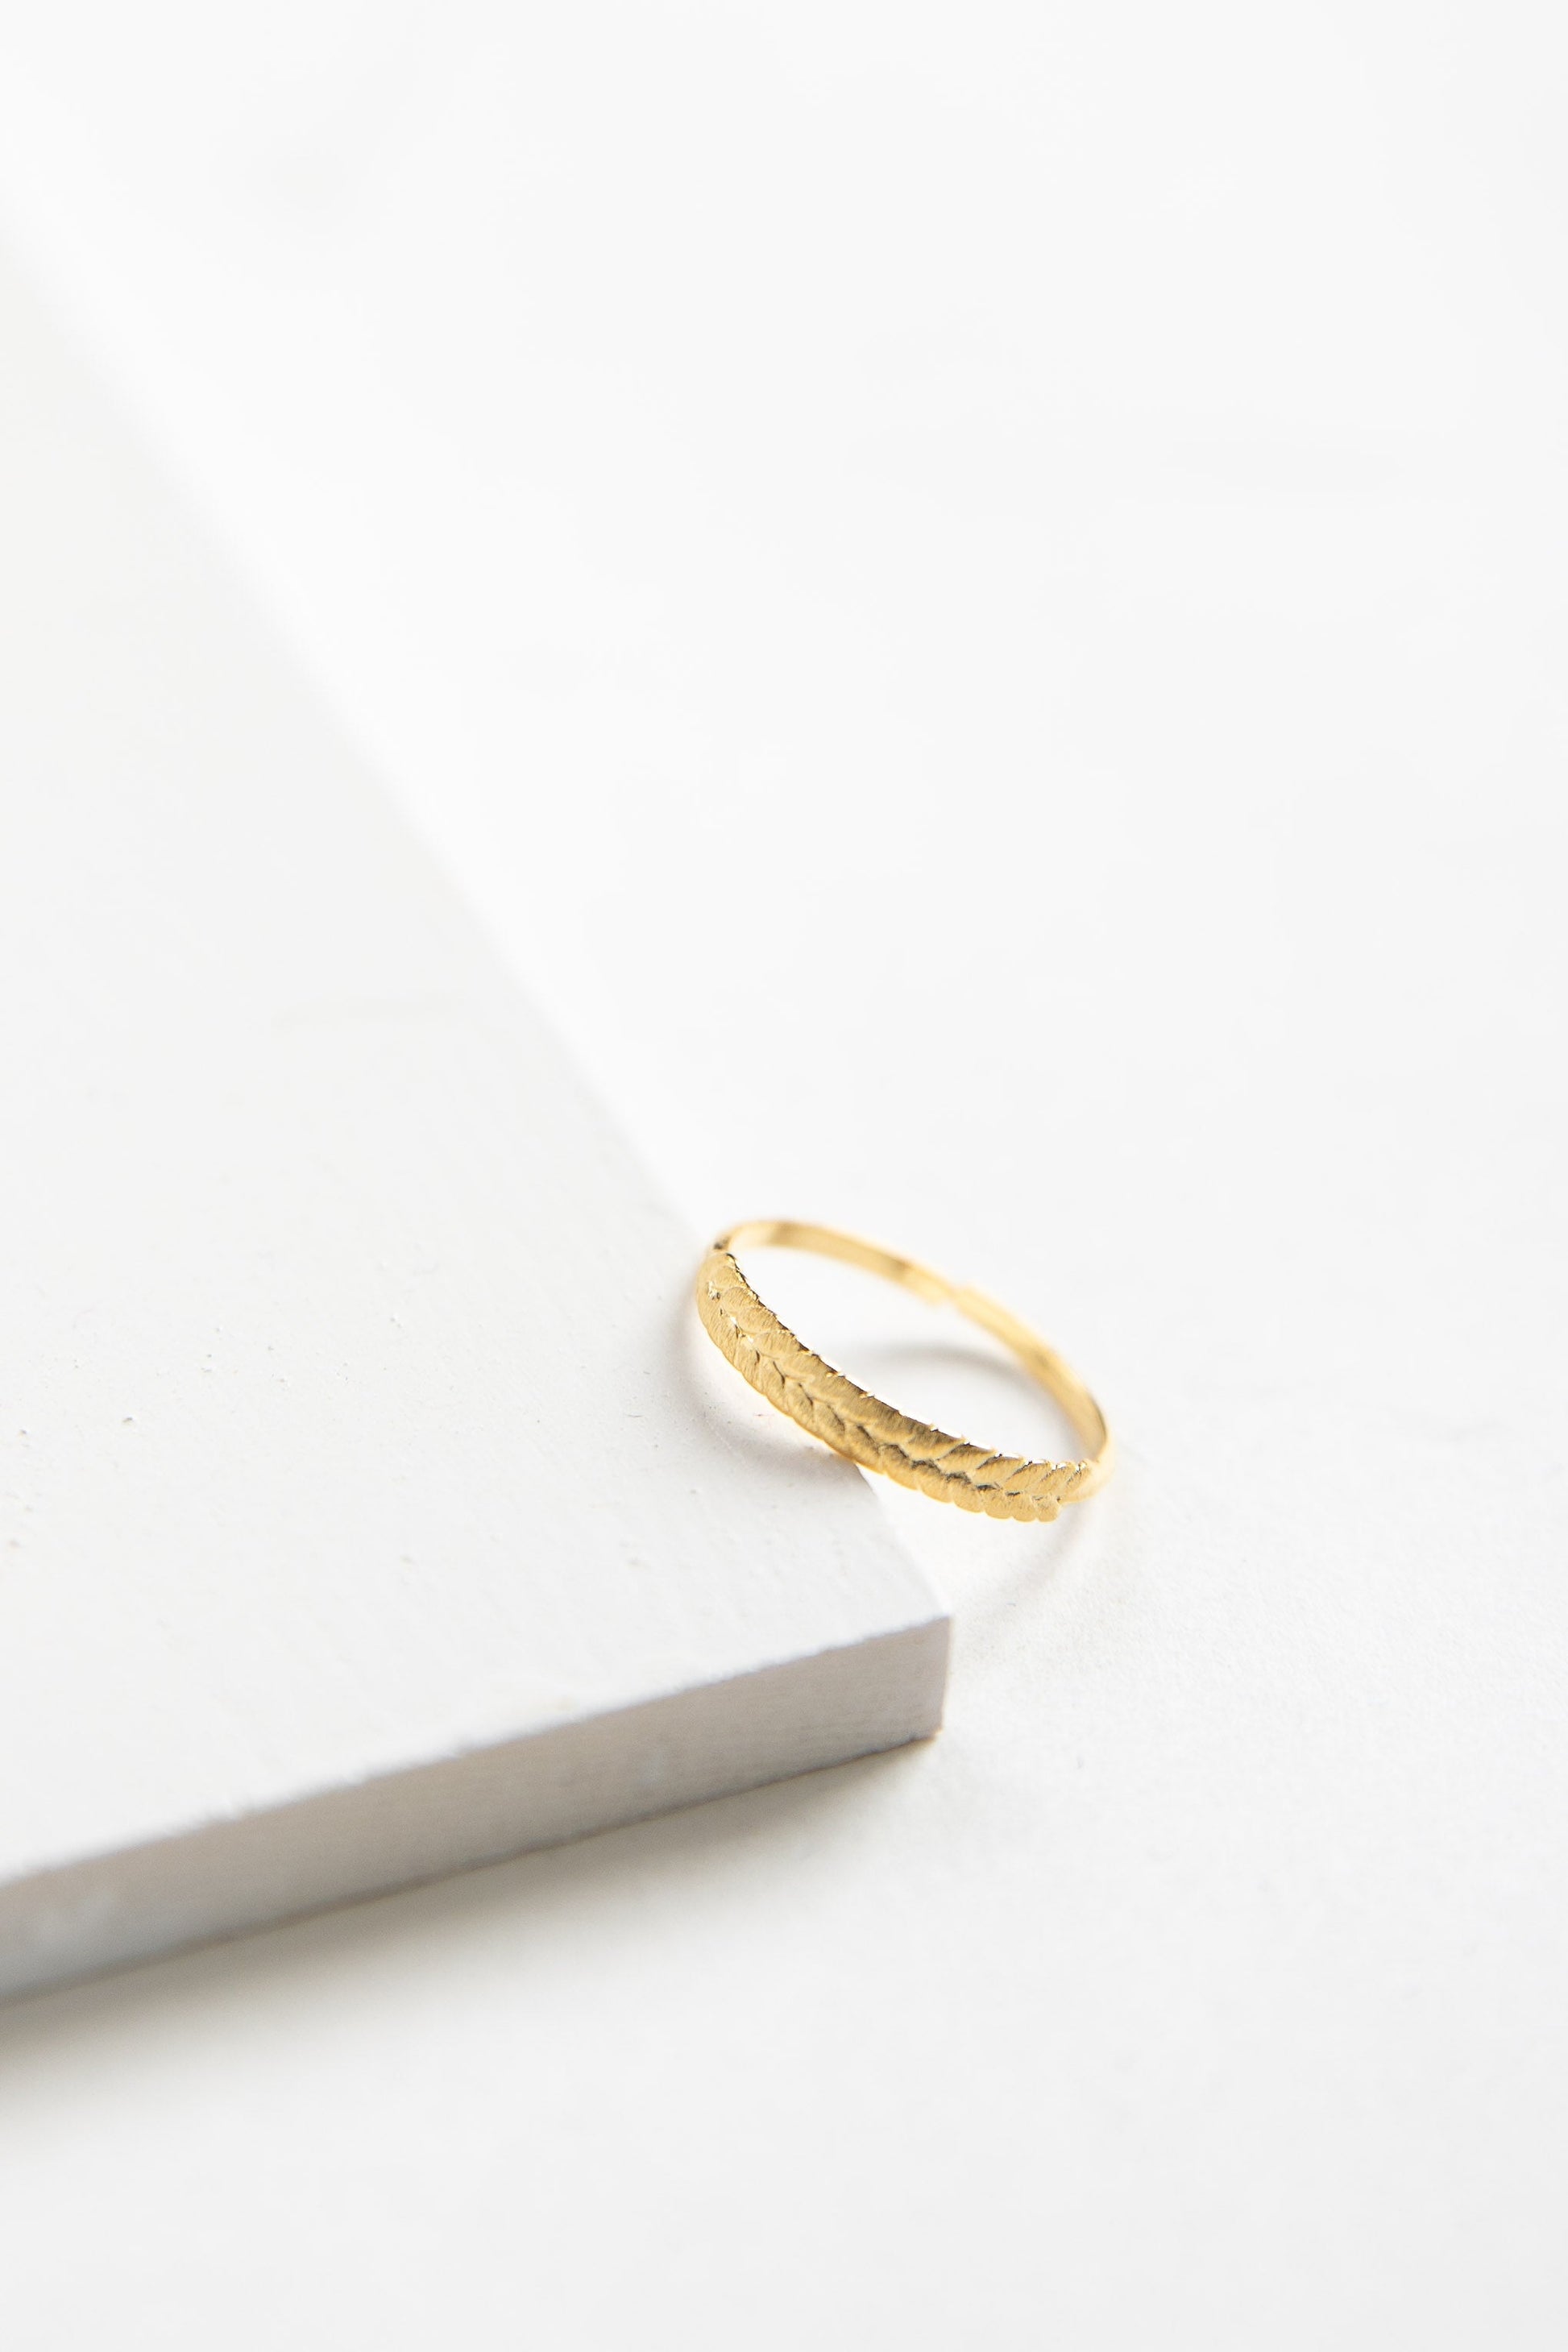 Delicate Adjustable Ring WOMEN'S RING Cove Gold Adjustable 